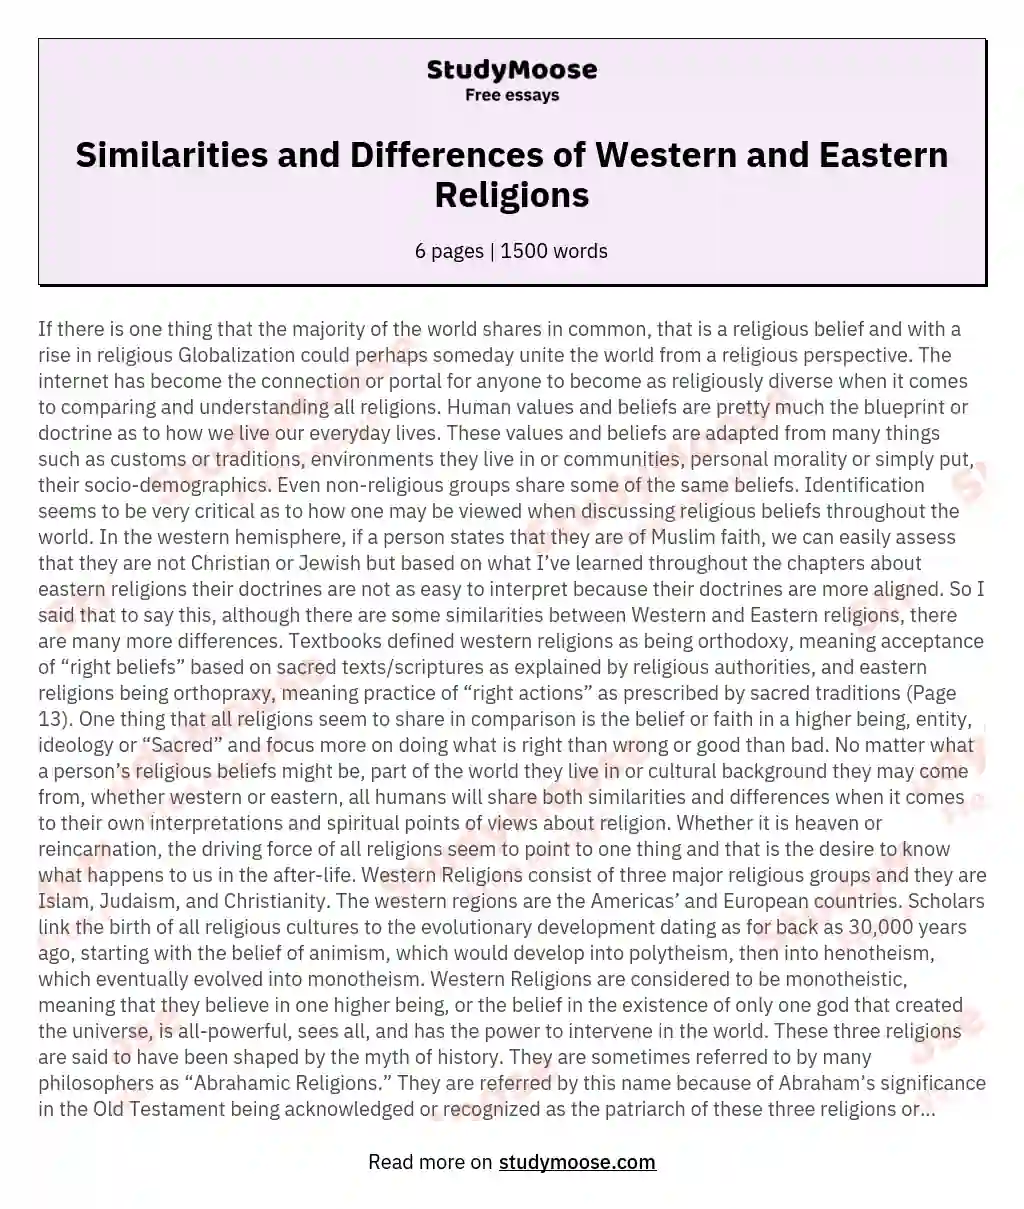 Similarities and Differences of Western and Eastern Religions